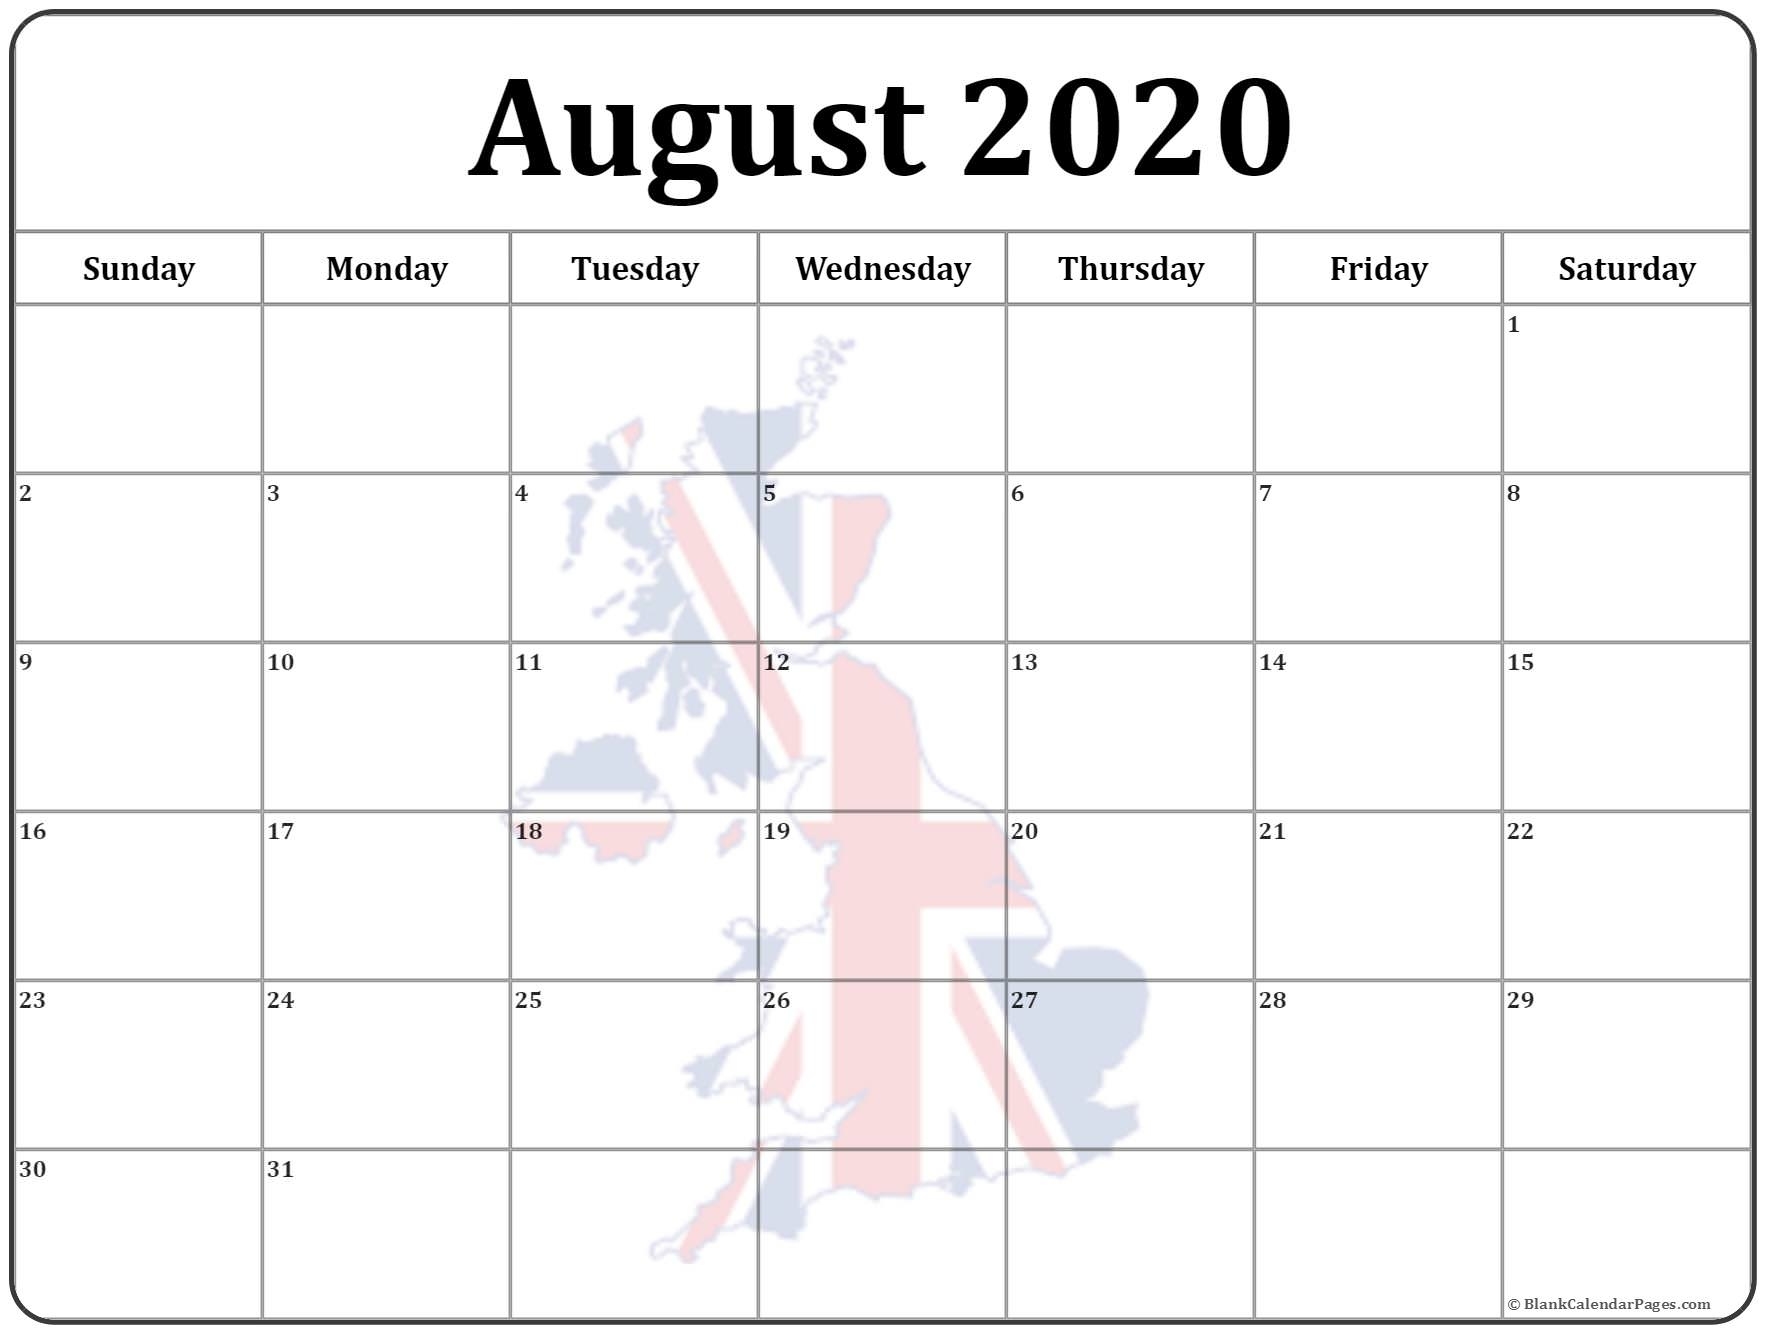 15+ August 2020 Printable Photo Calendars With Image Filters. Extraordinary August 2020 Calendar Uk